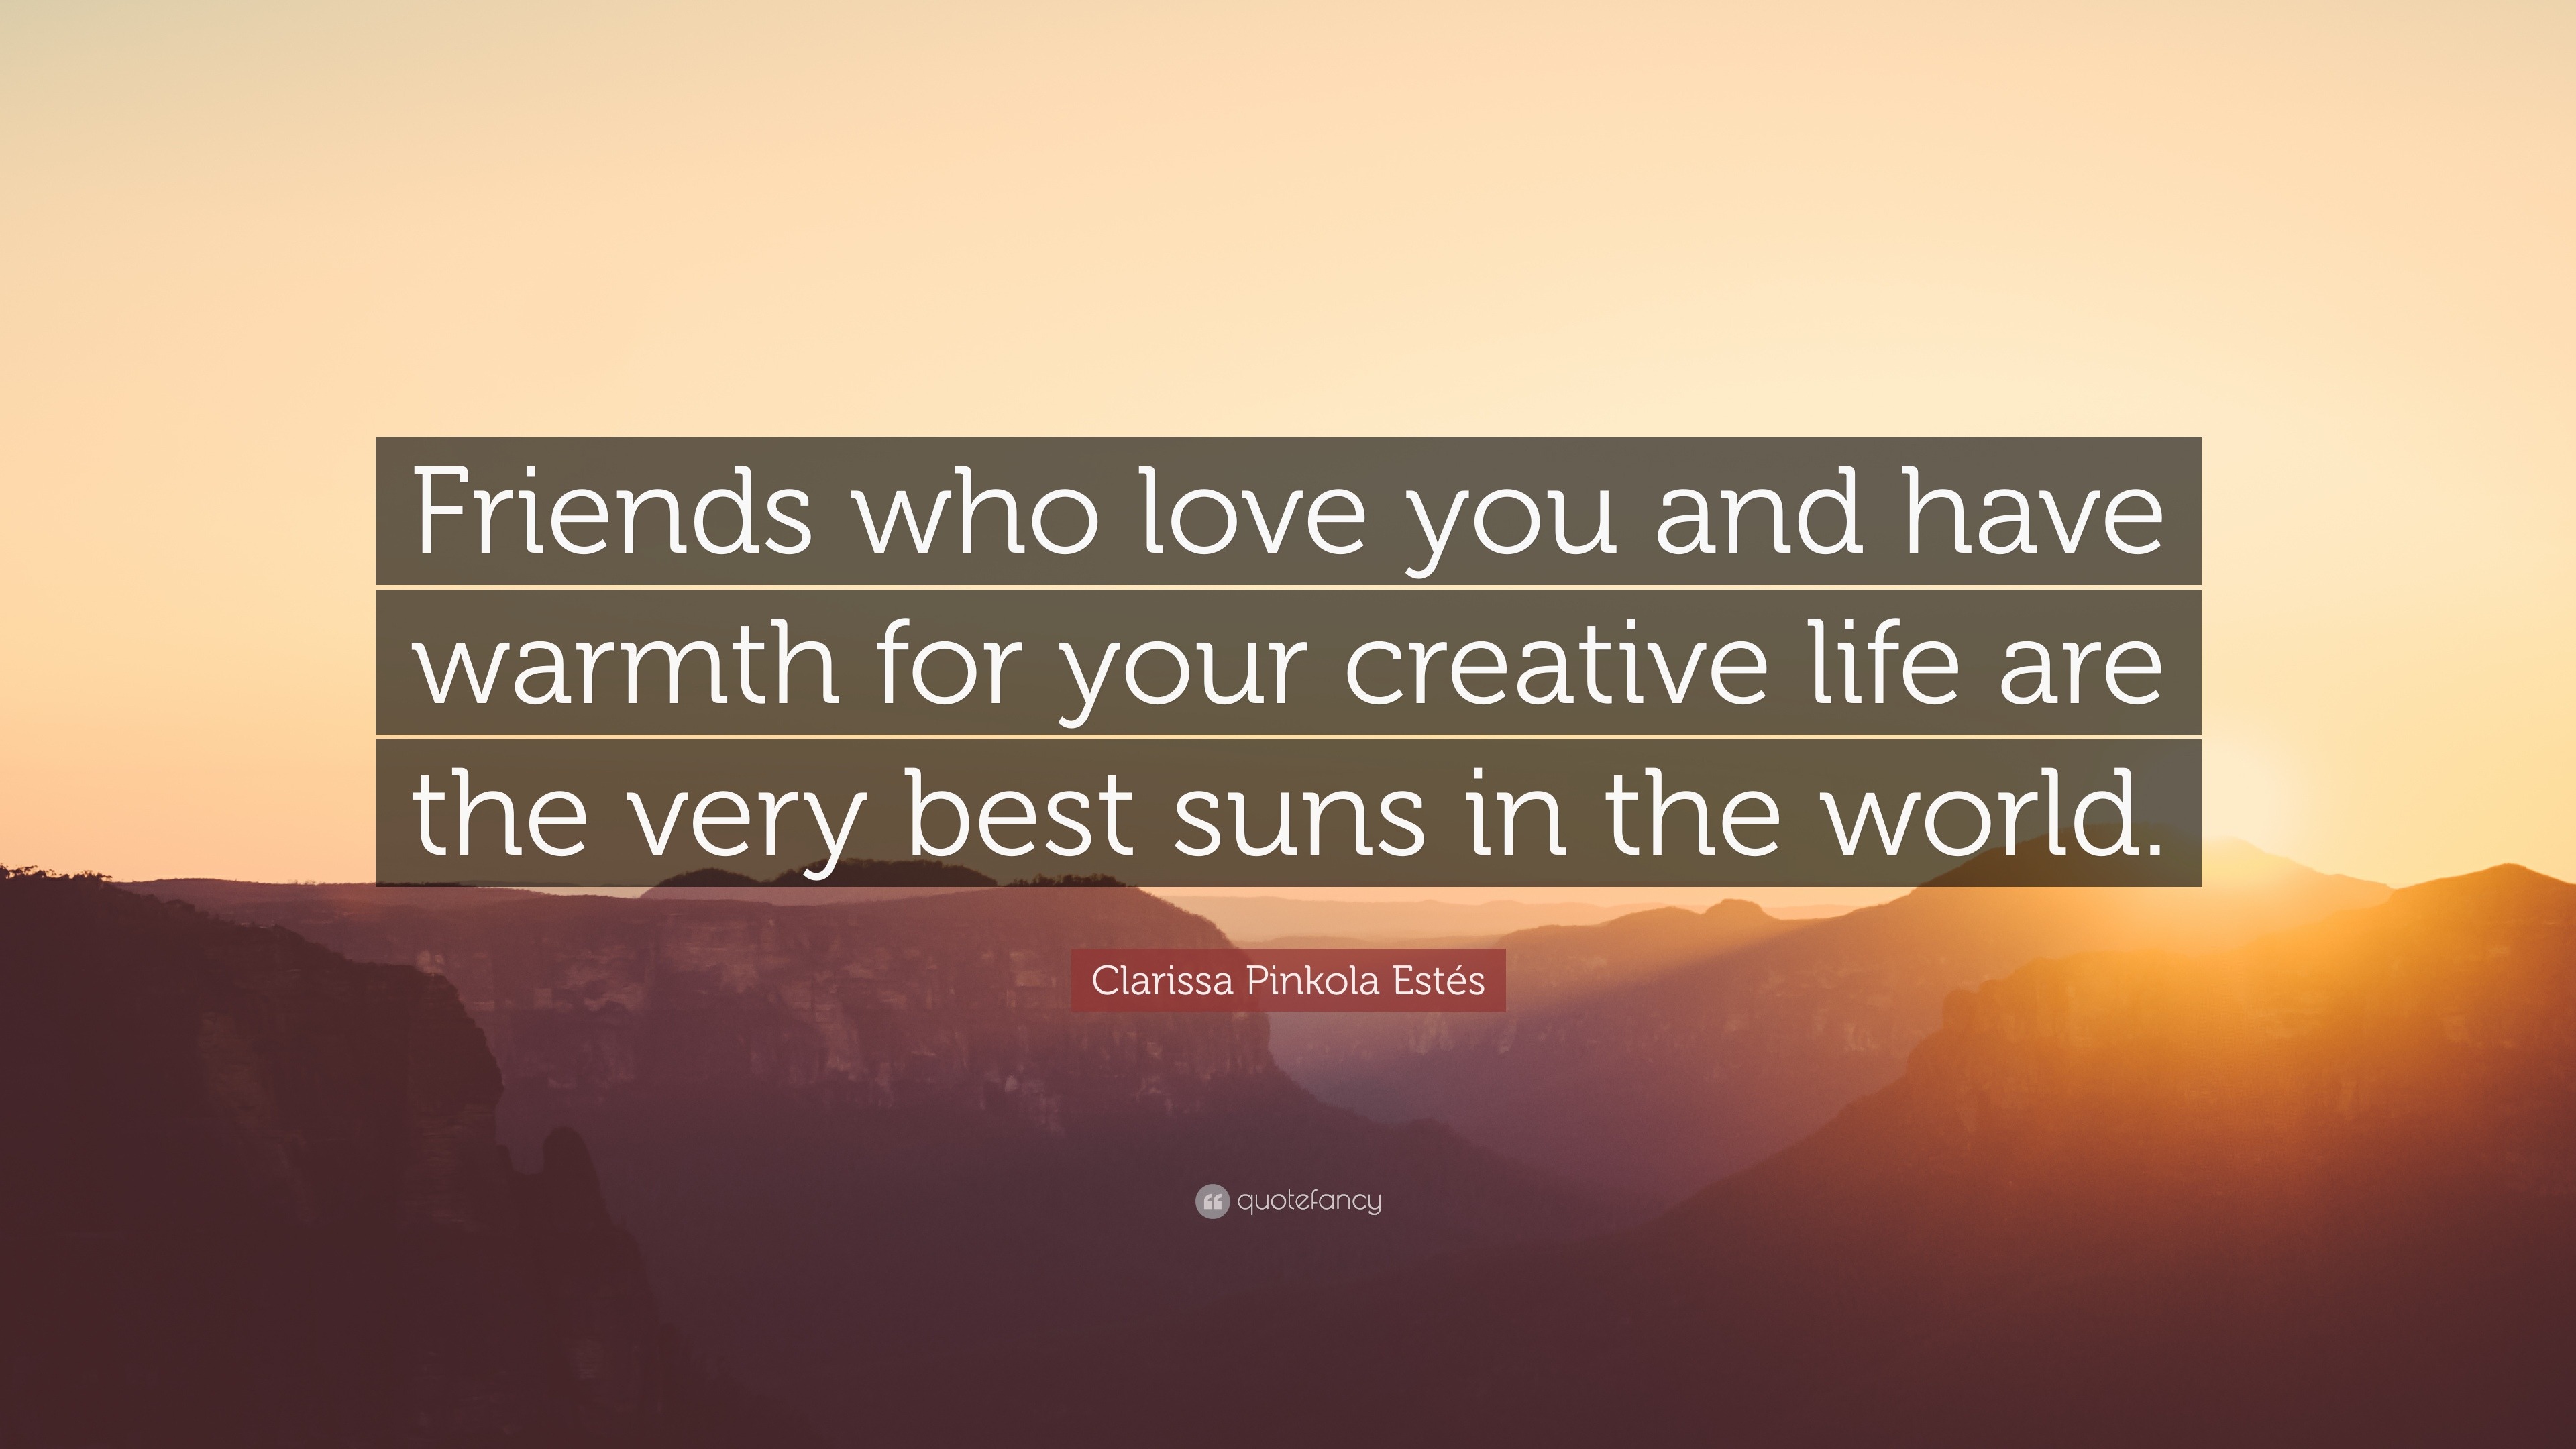 Clarissa Pinkola Estes Quote Friends Who Love You And Have Warmth For Your Creative Life Are